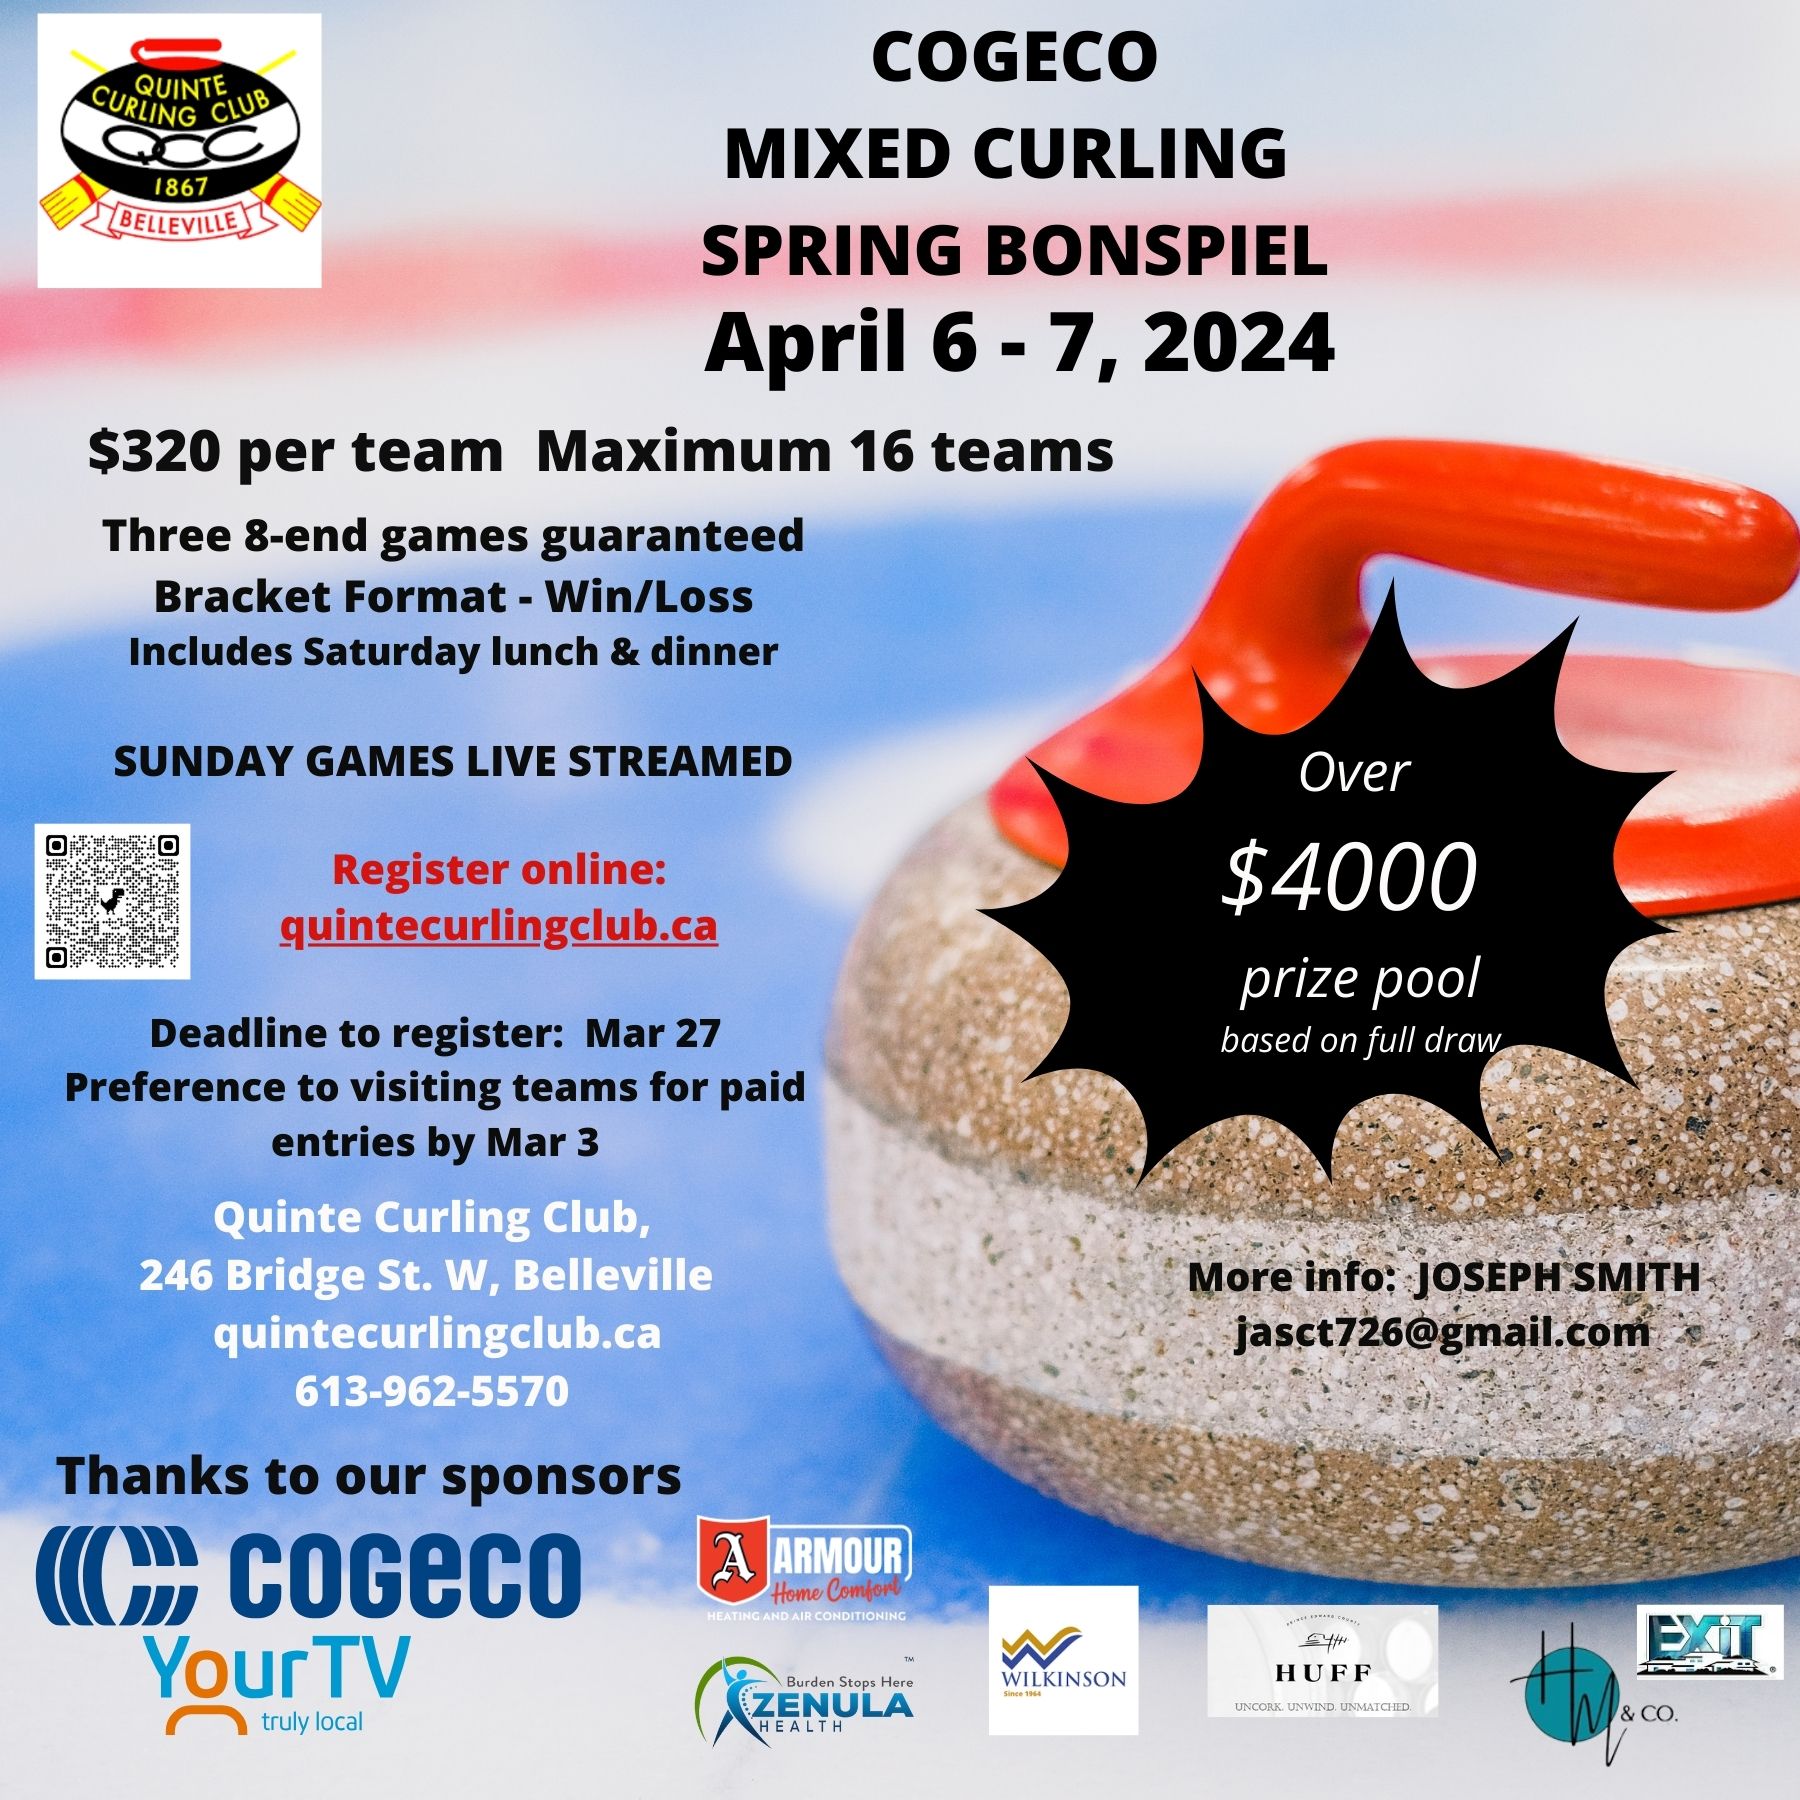 poster for event with photo of curling rock